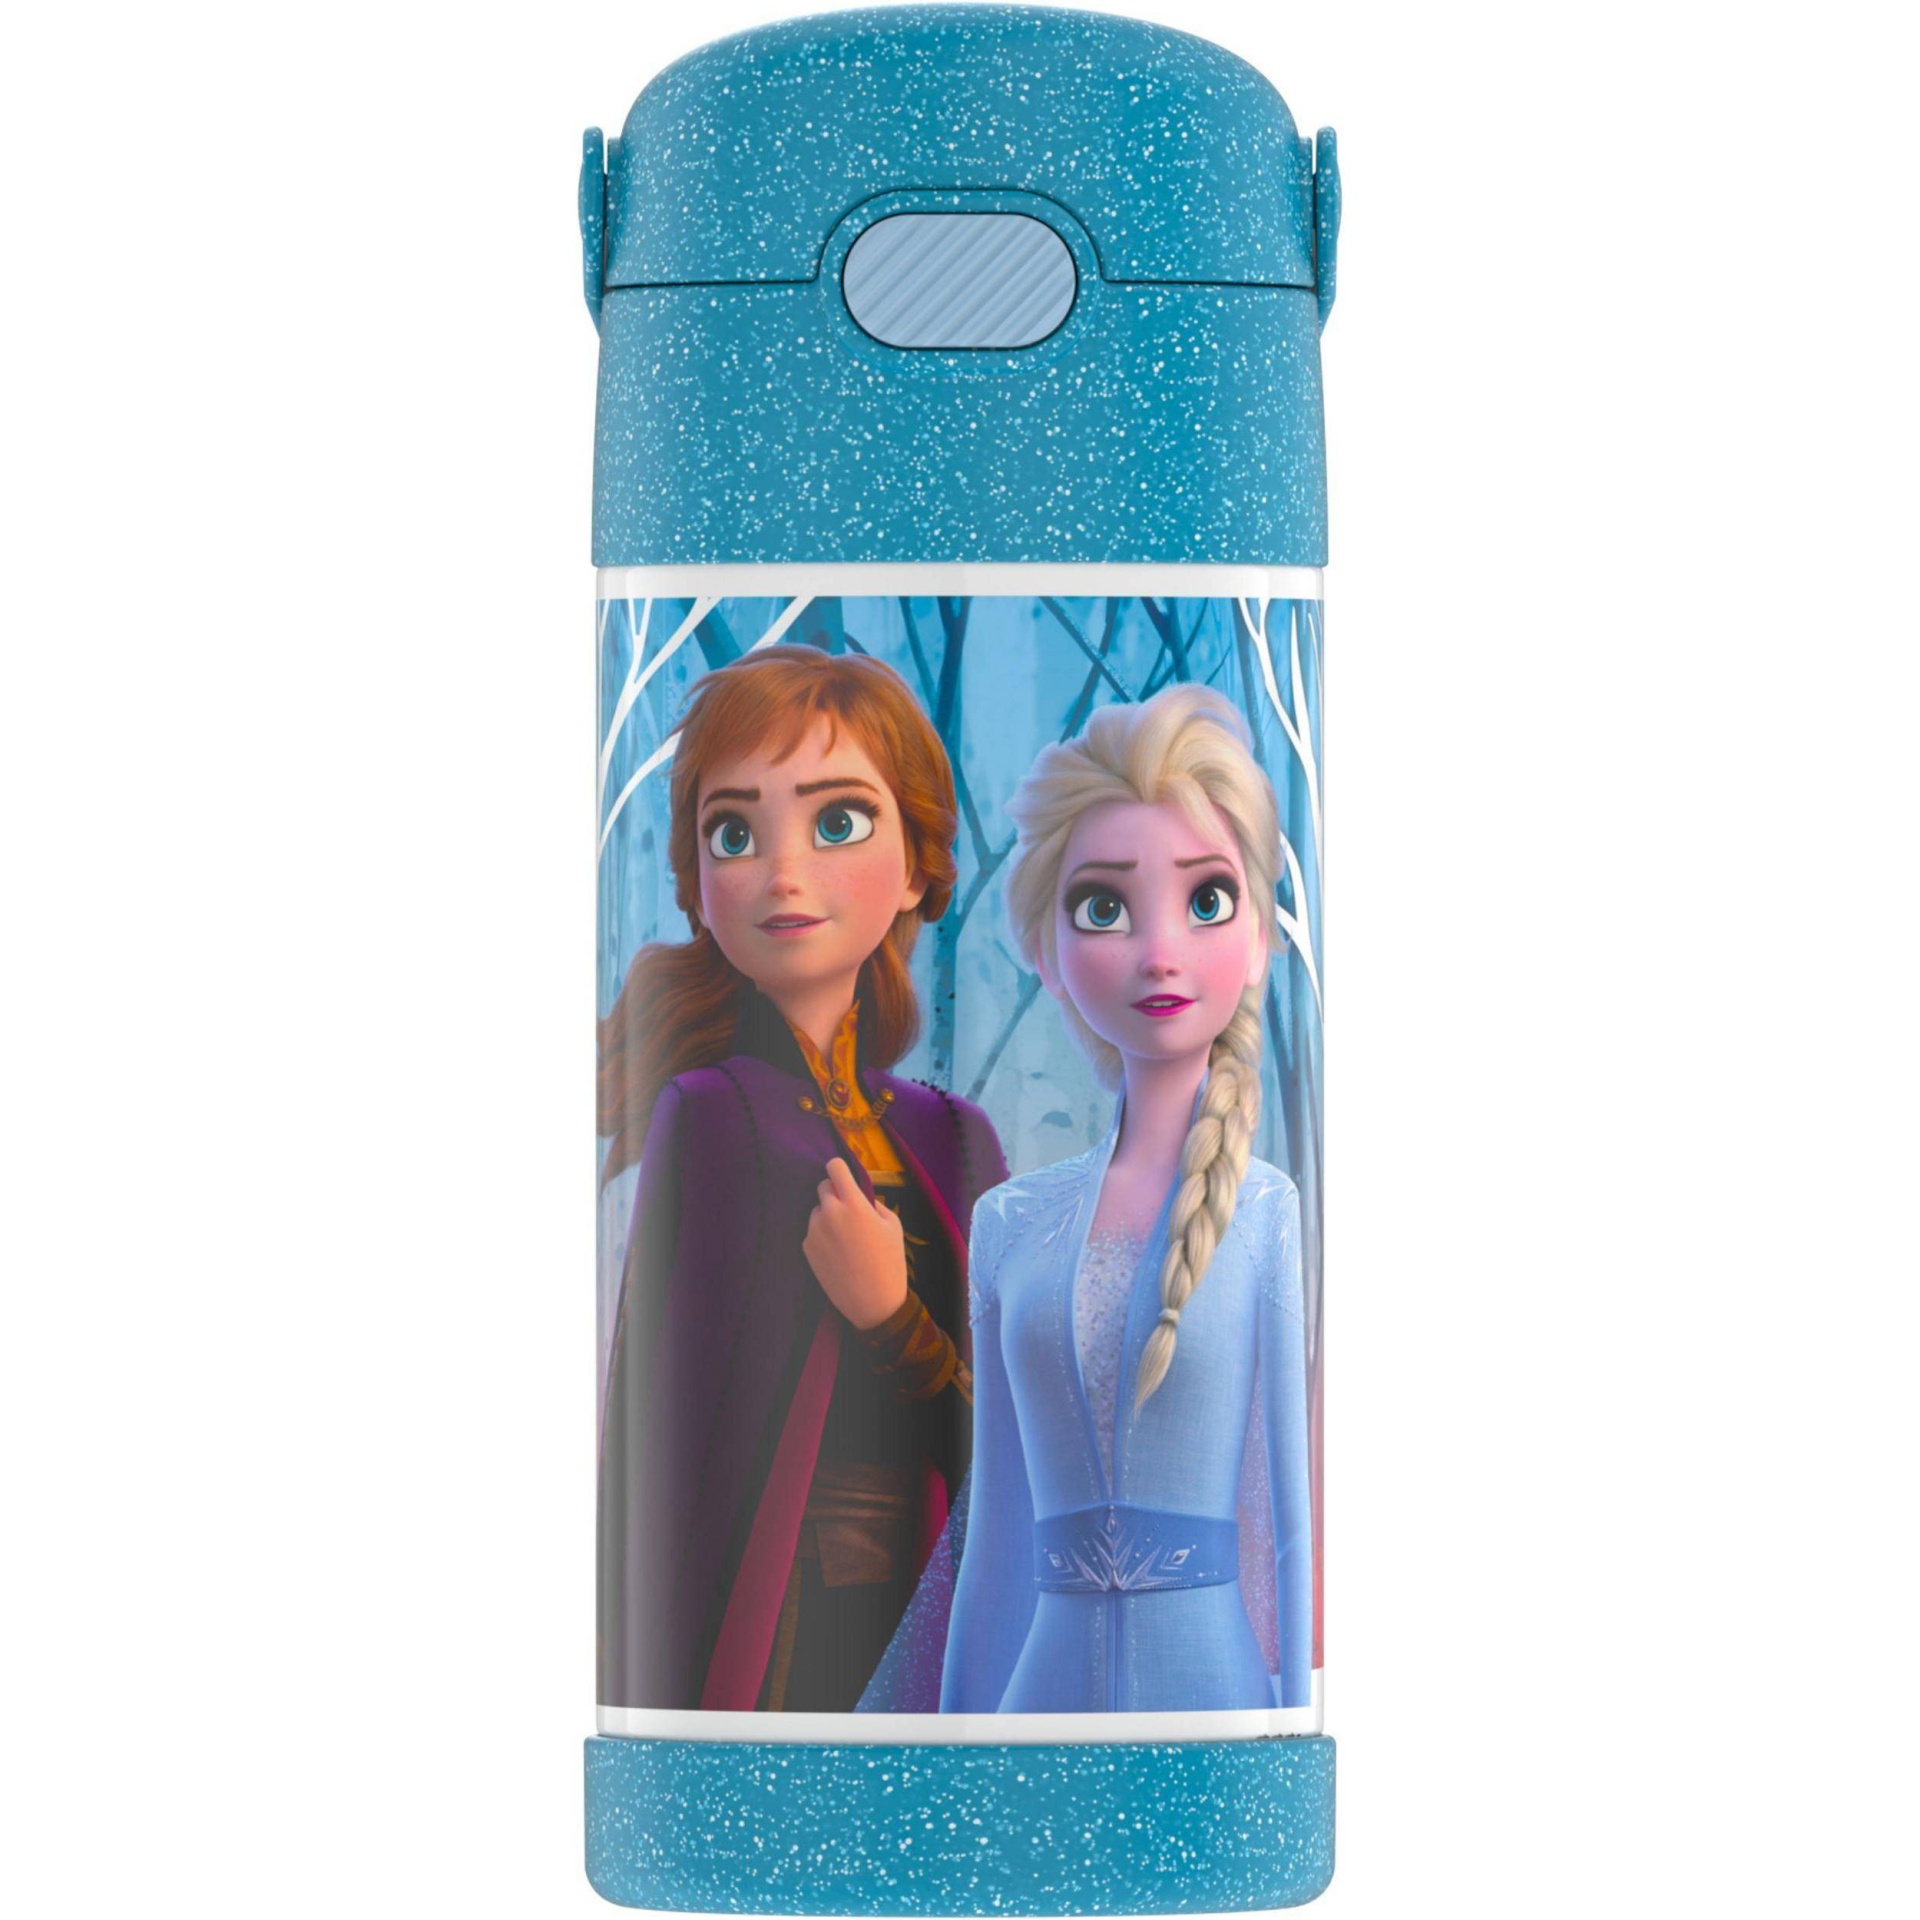 Thermos 12oz Funtainer Water Bottle With Bail Handle - Frozen : Target